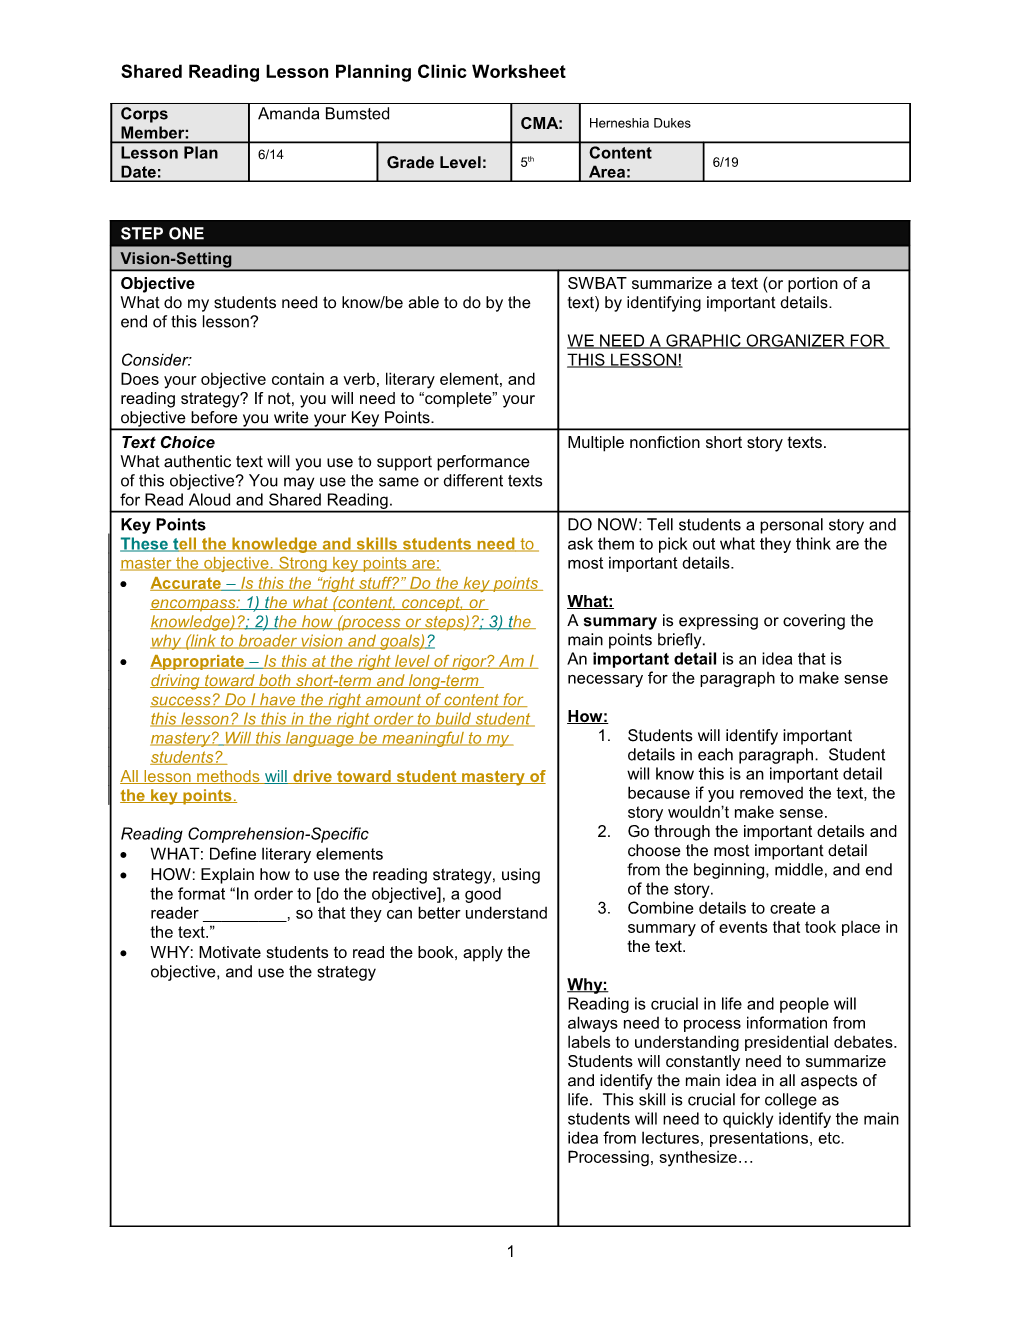 Lesson Planning Clinic - Worksheet